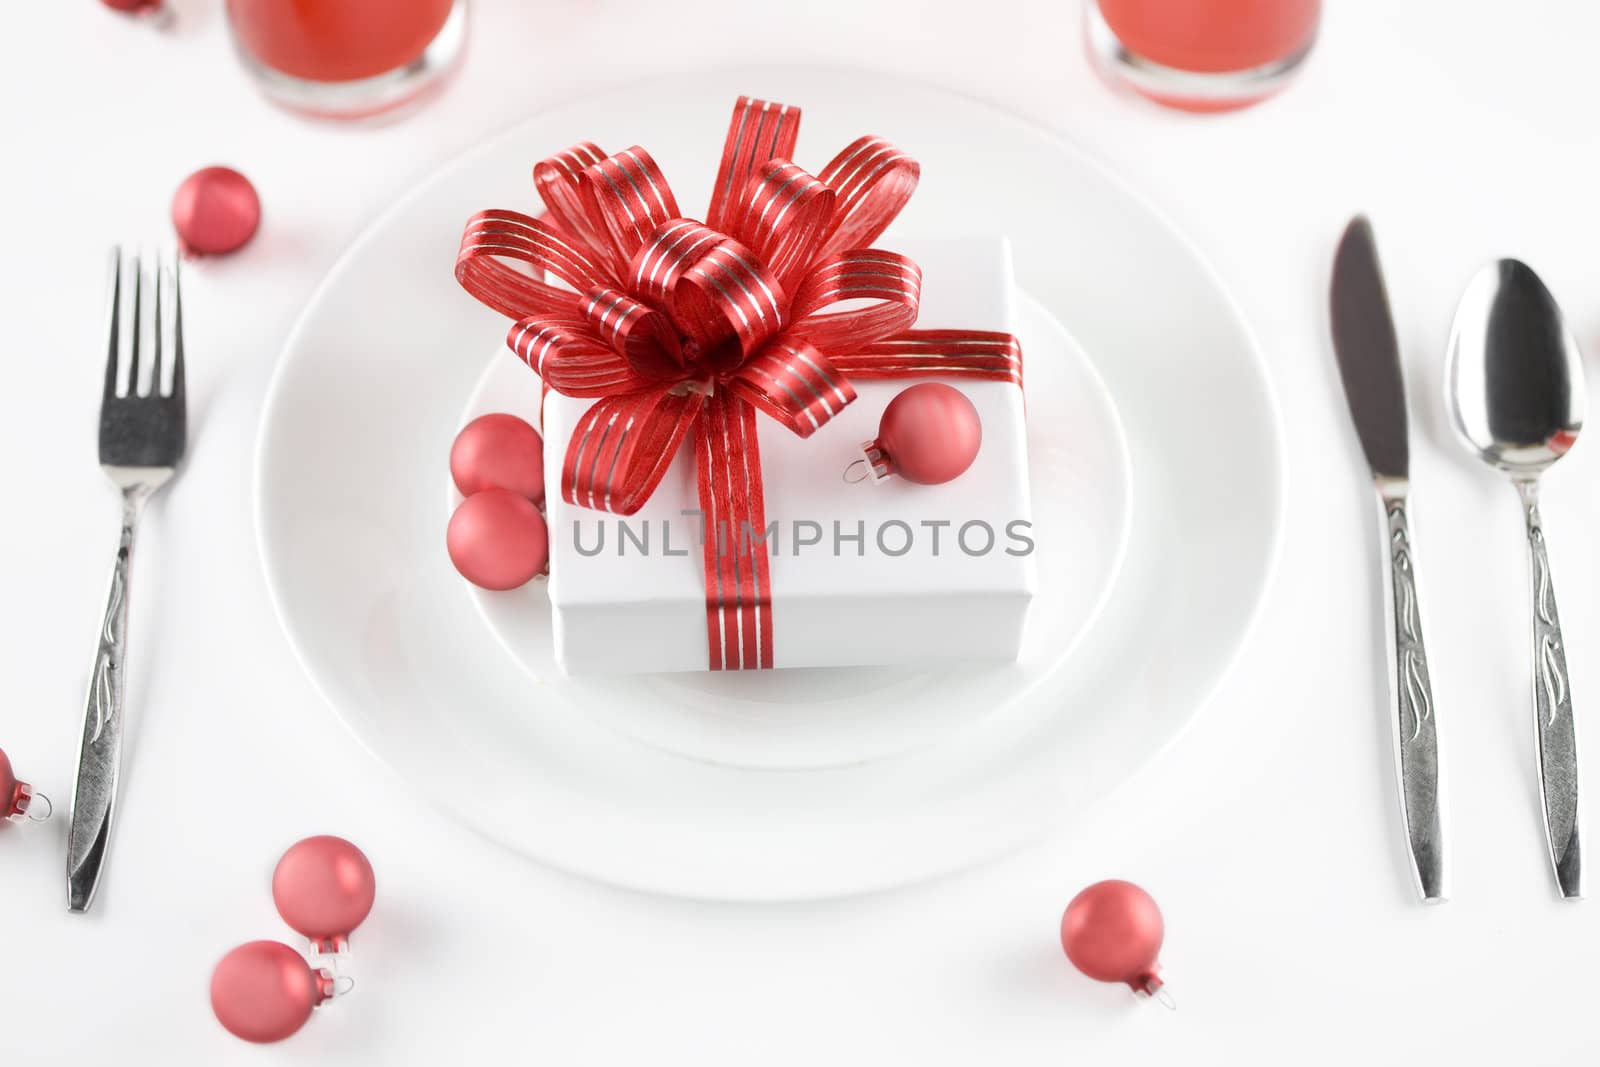 gift on plate as table decorations by jarenwicklund